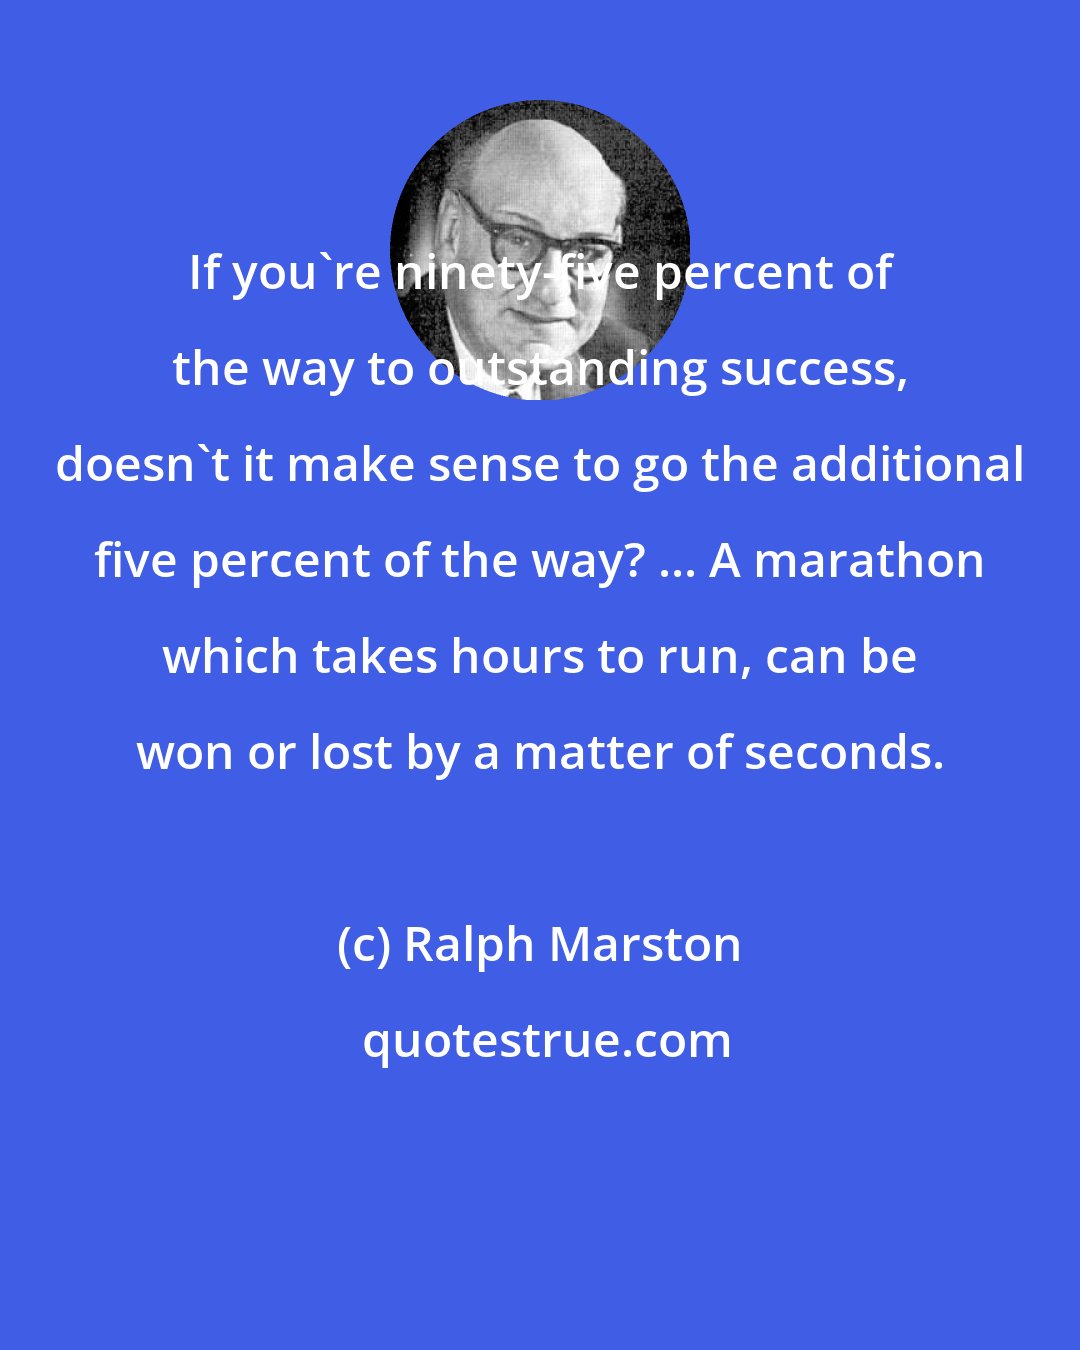 Ralph Marston: If you're ninety-five percent of the way to outstanding success, doesn't it make sense to go the additional five percent of the way? ... A marathon which takes hours to run, can be won or lost by a matter of seconds.